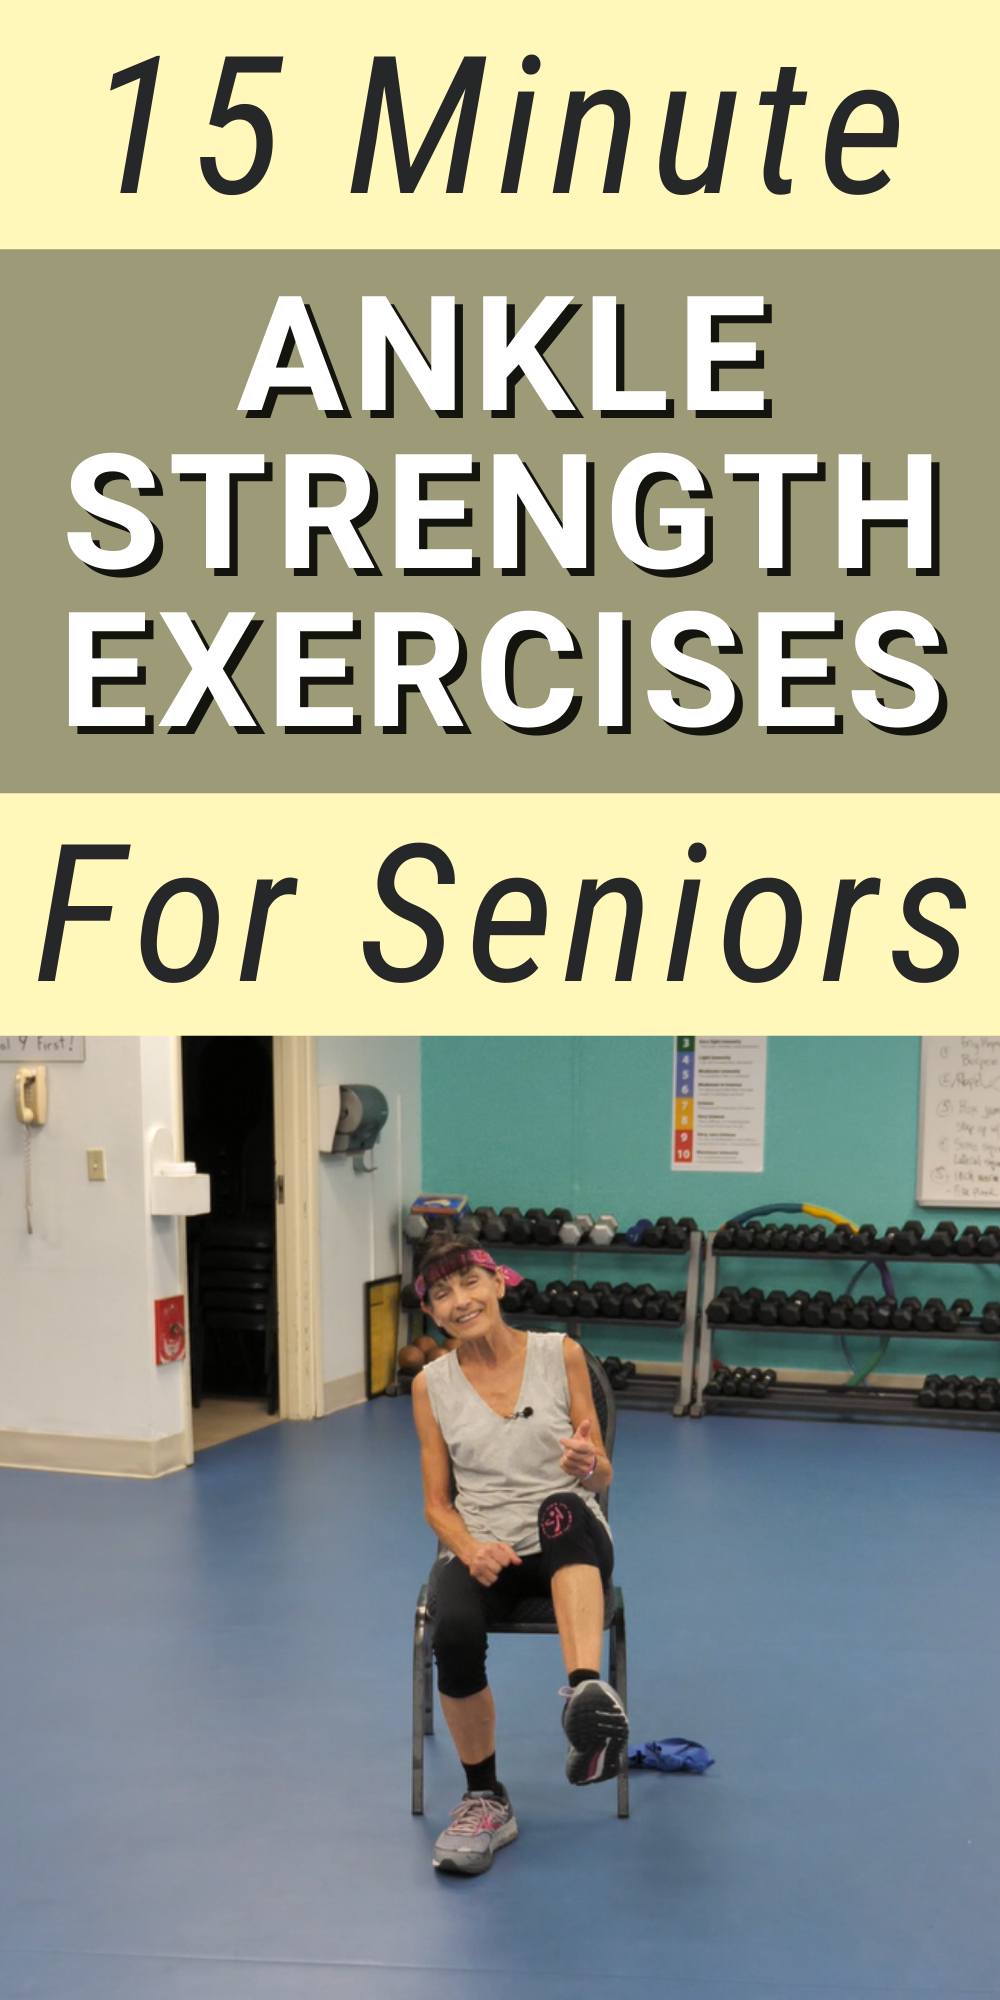 Ankle Strengthening Exercises For Seniors - Fitness With Cindy